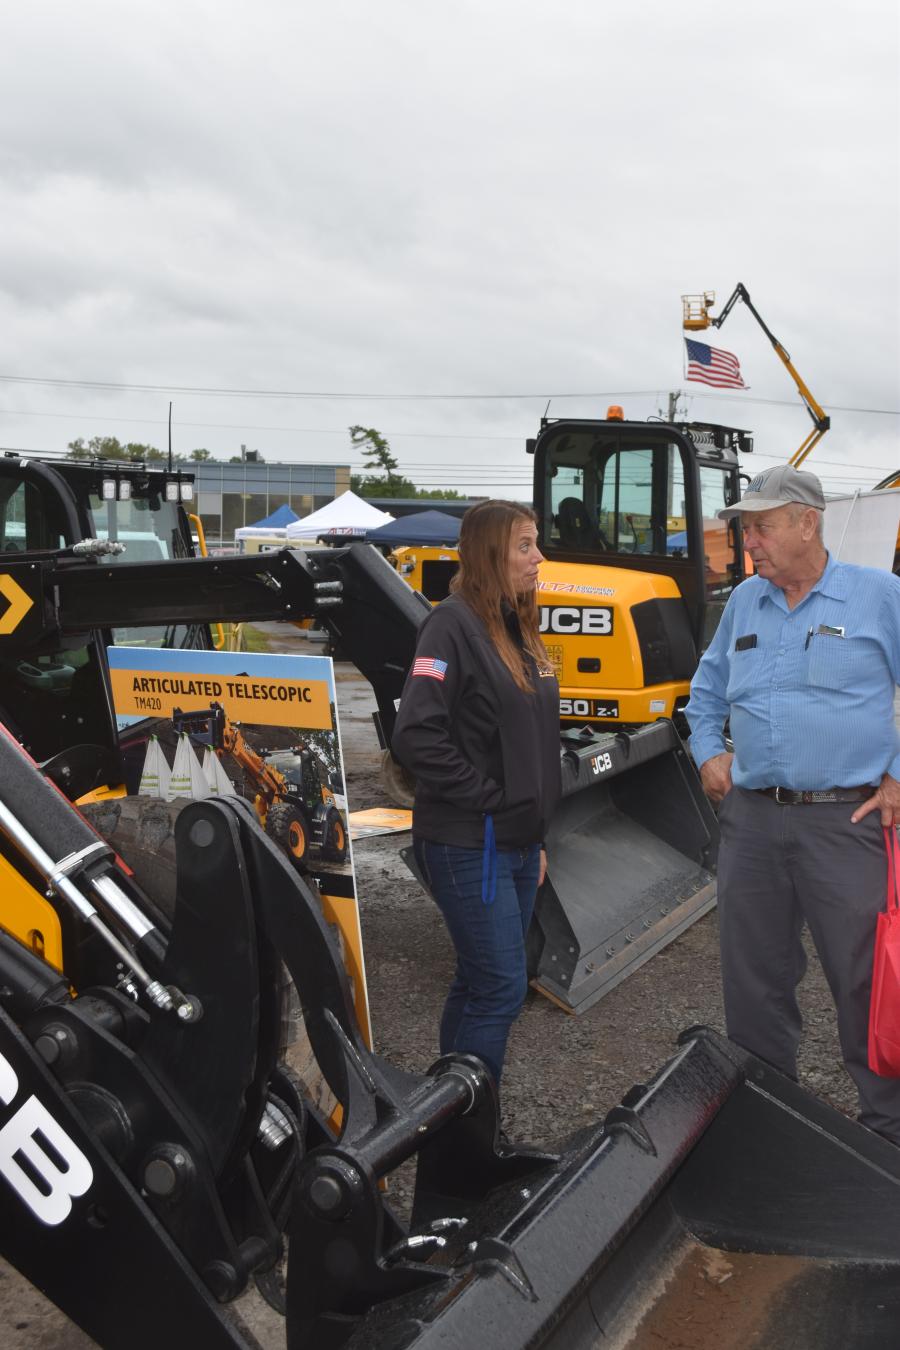 JCB products are an important part of Alta Equipment’s compact machine offerings.
(CEG photo)